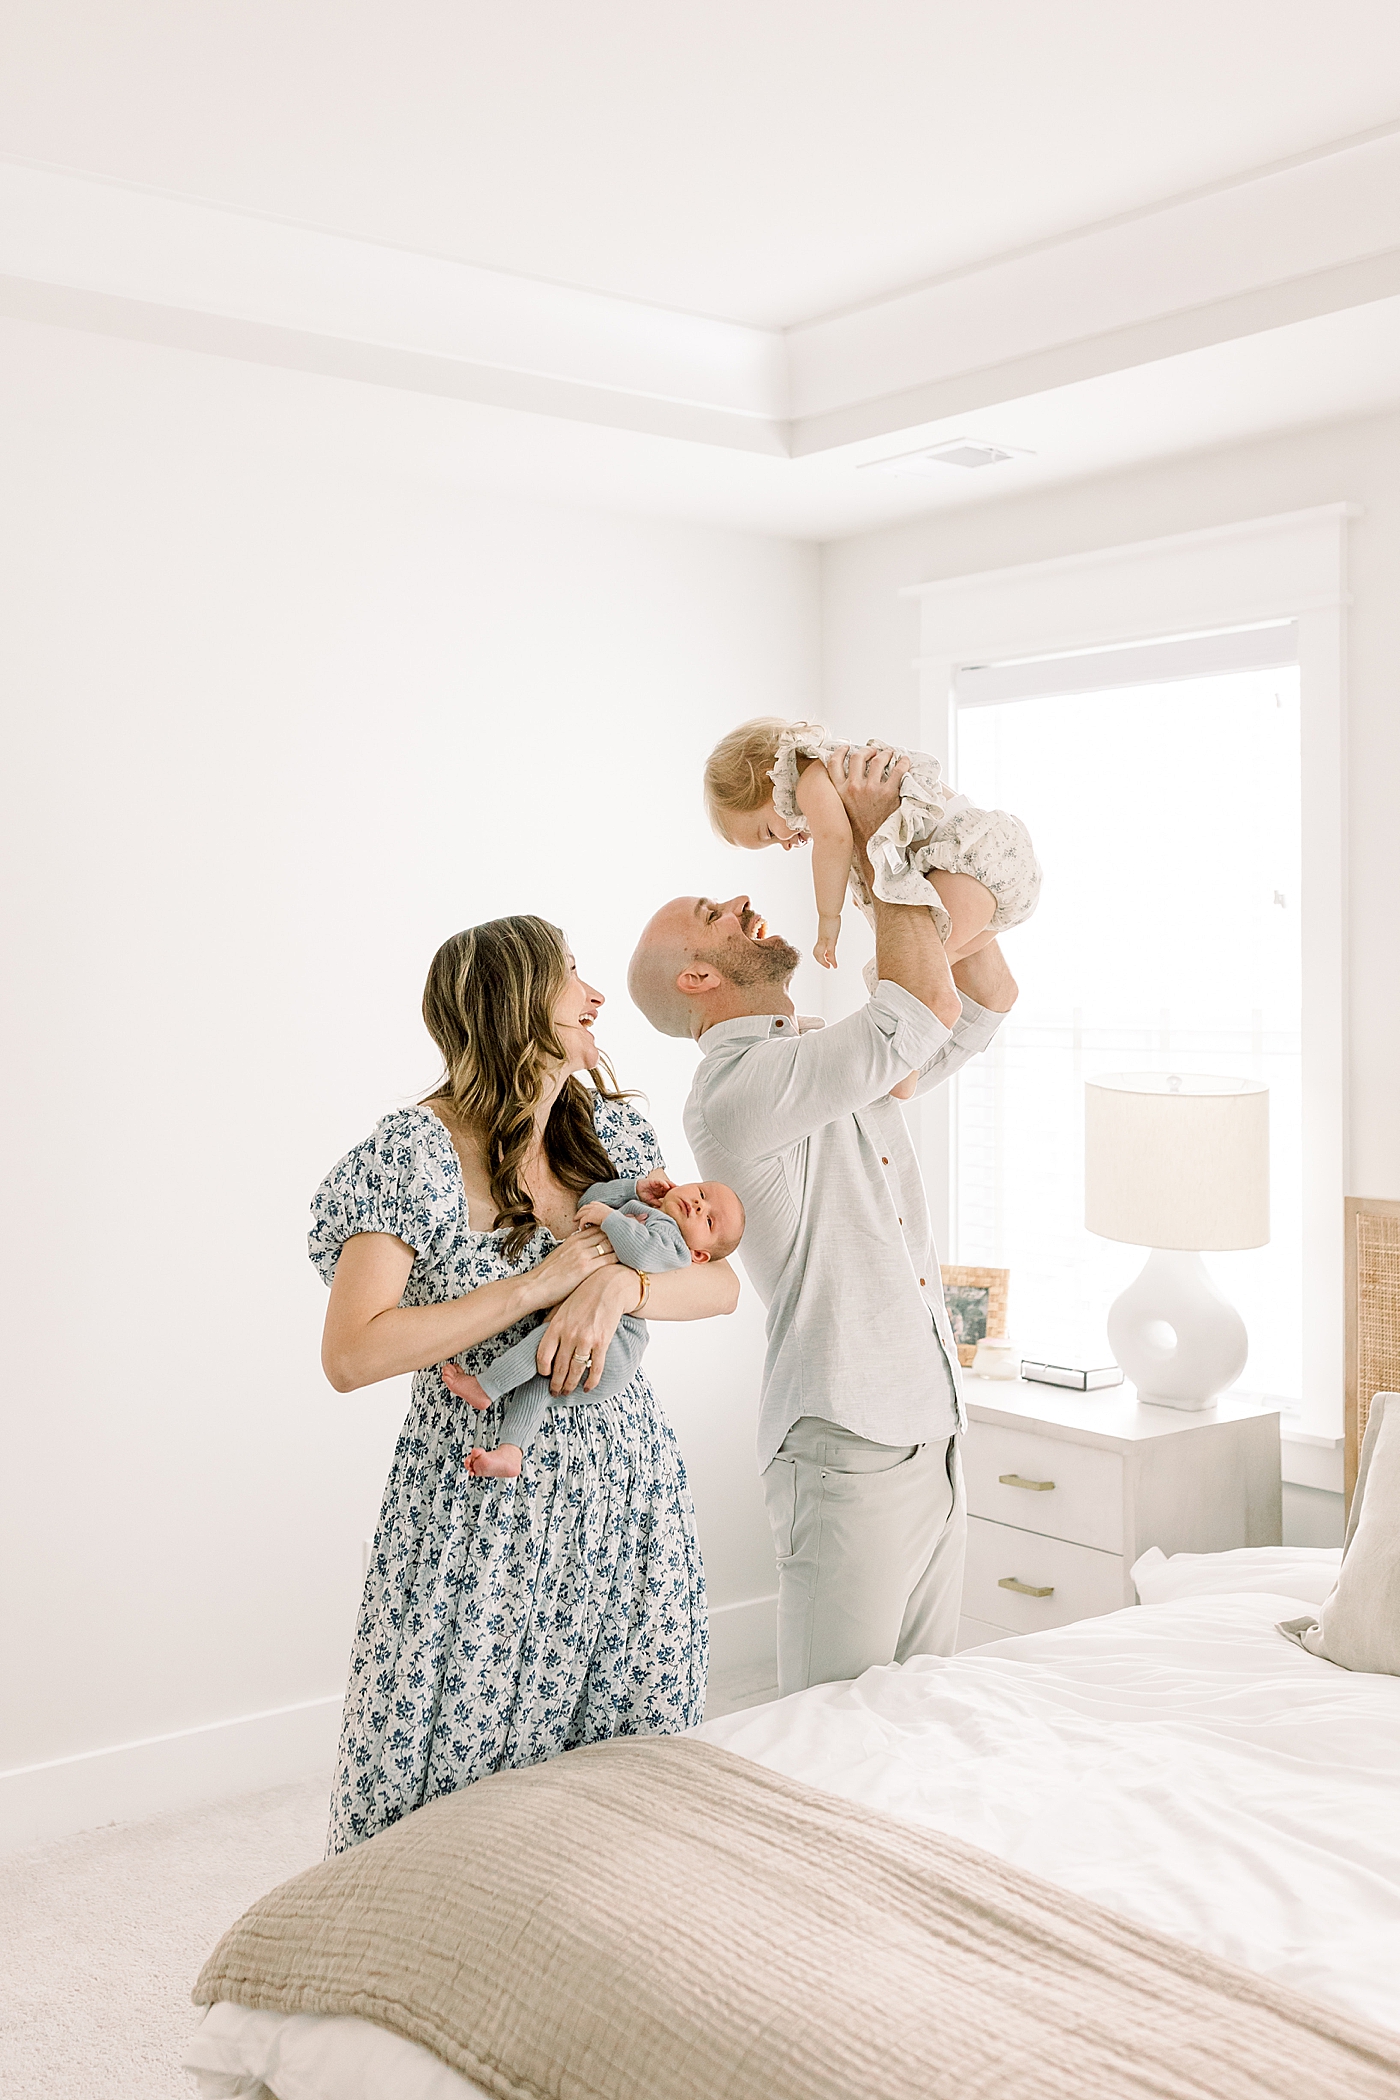 Mom and dad playing with their babies in their bedroom | Image by Caitlyn Motycka